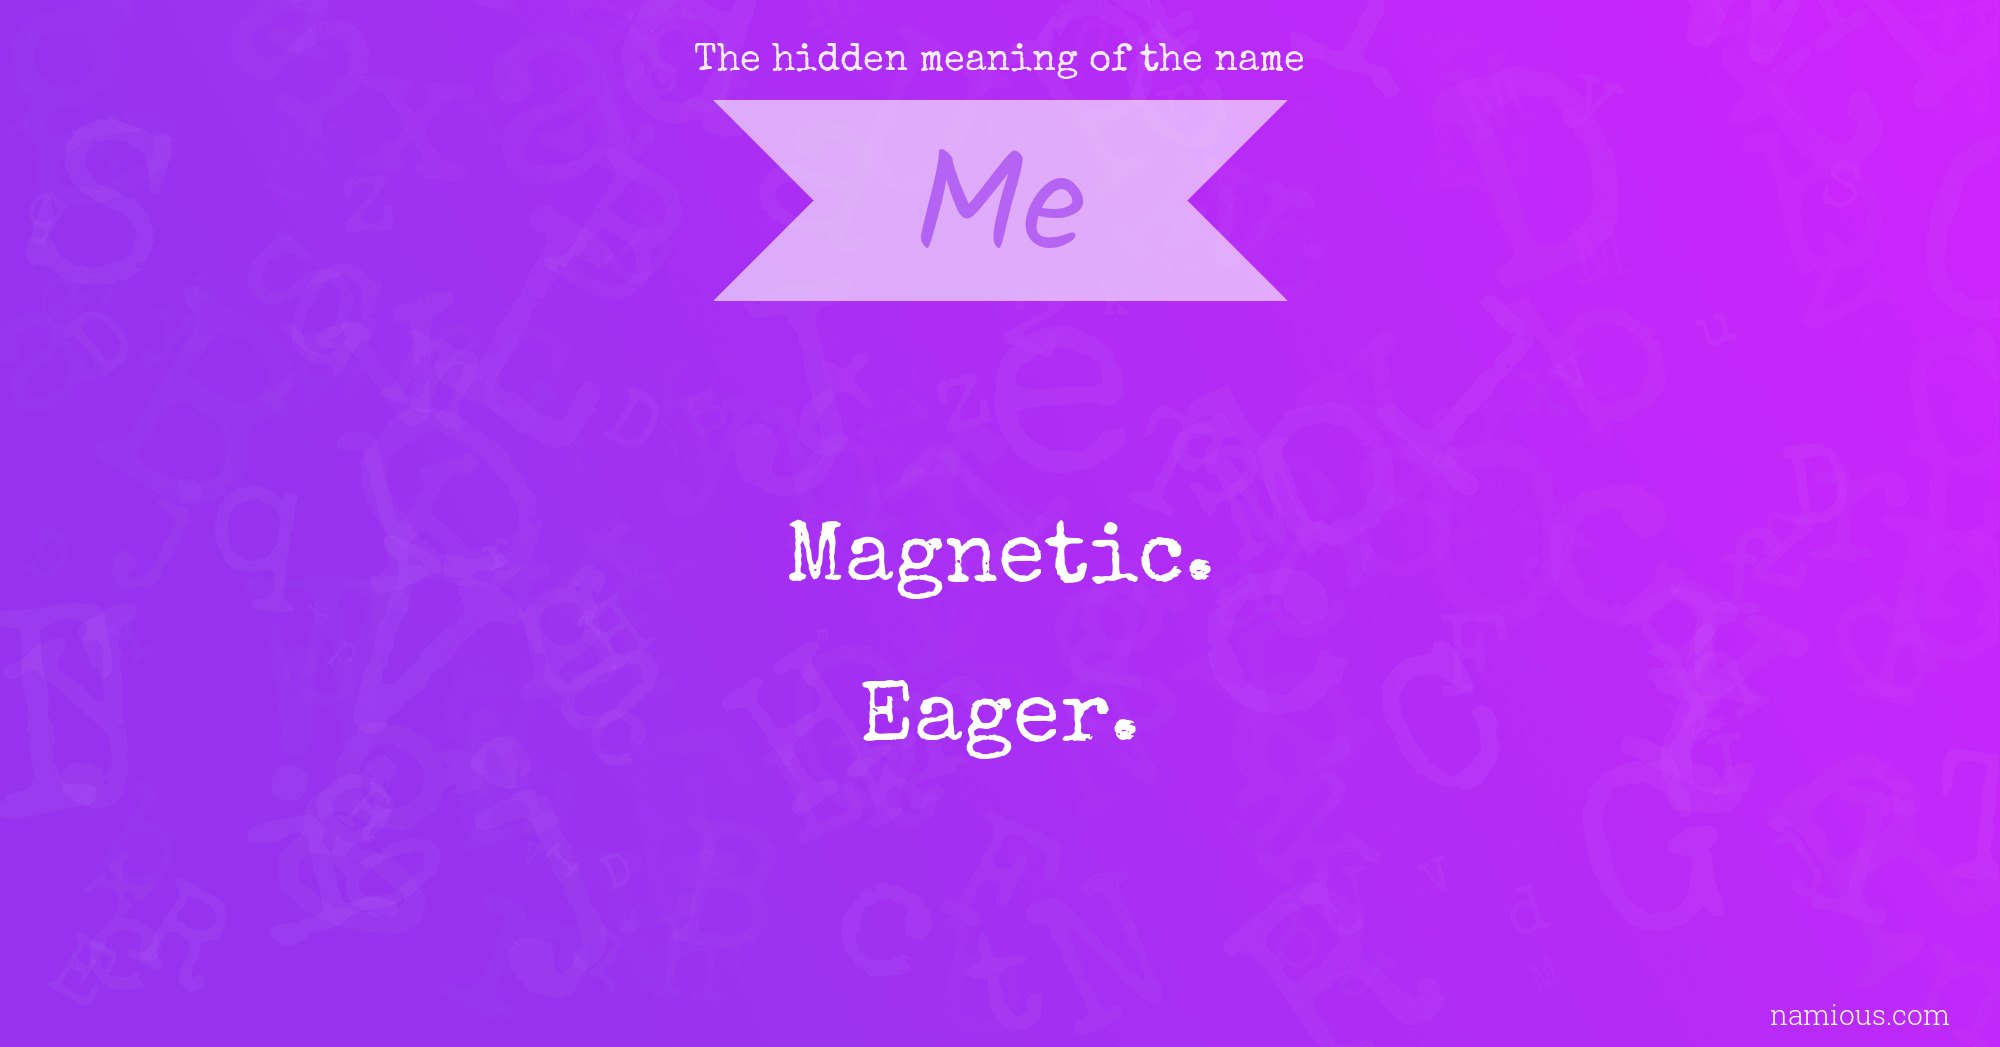 The hidden meaning of the name Me